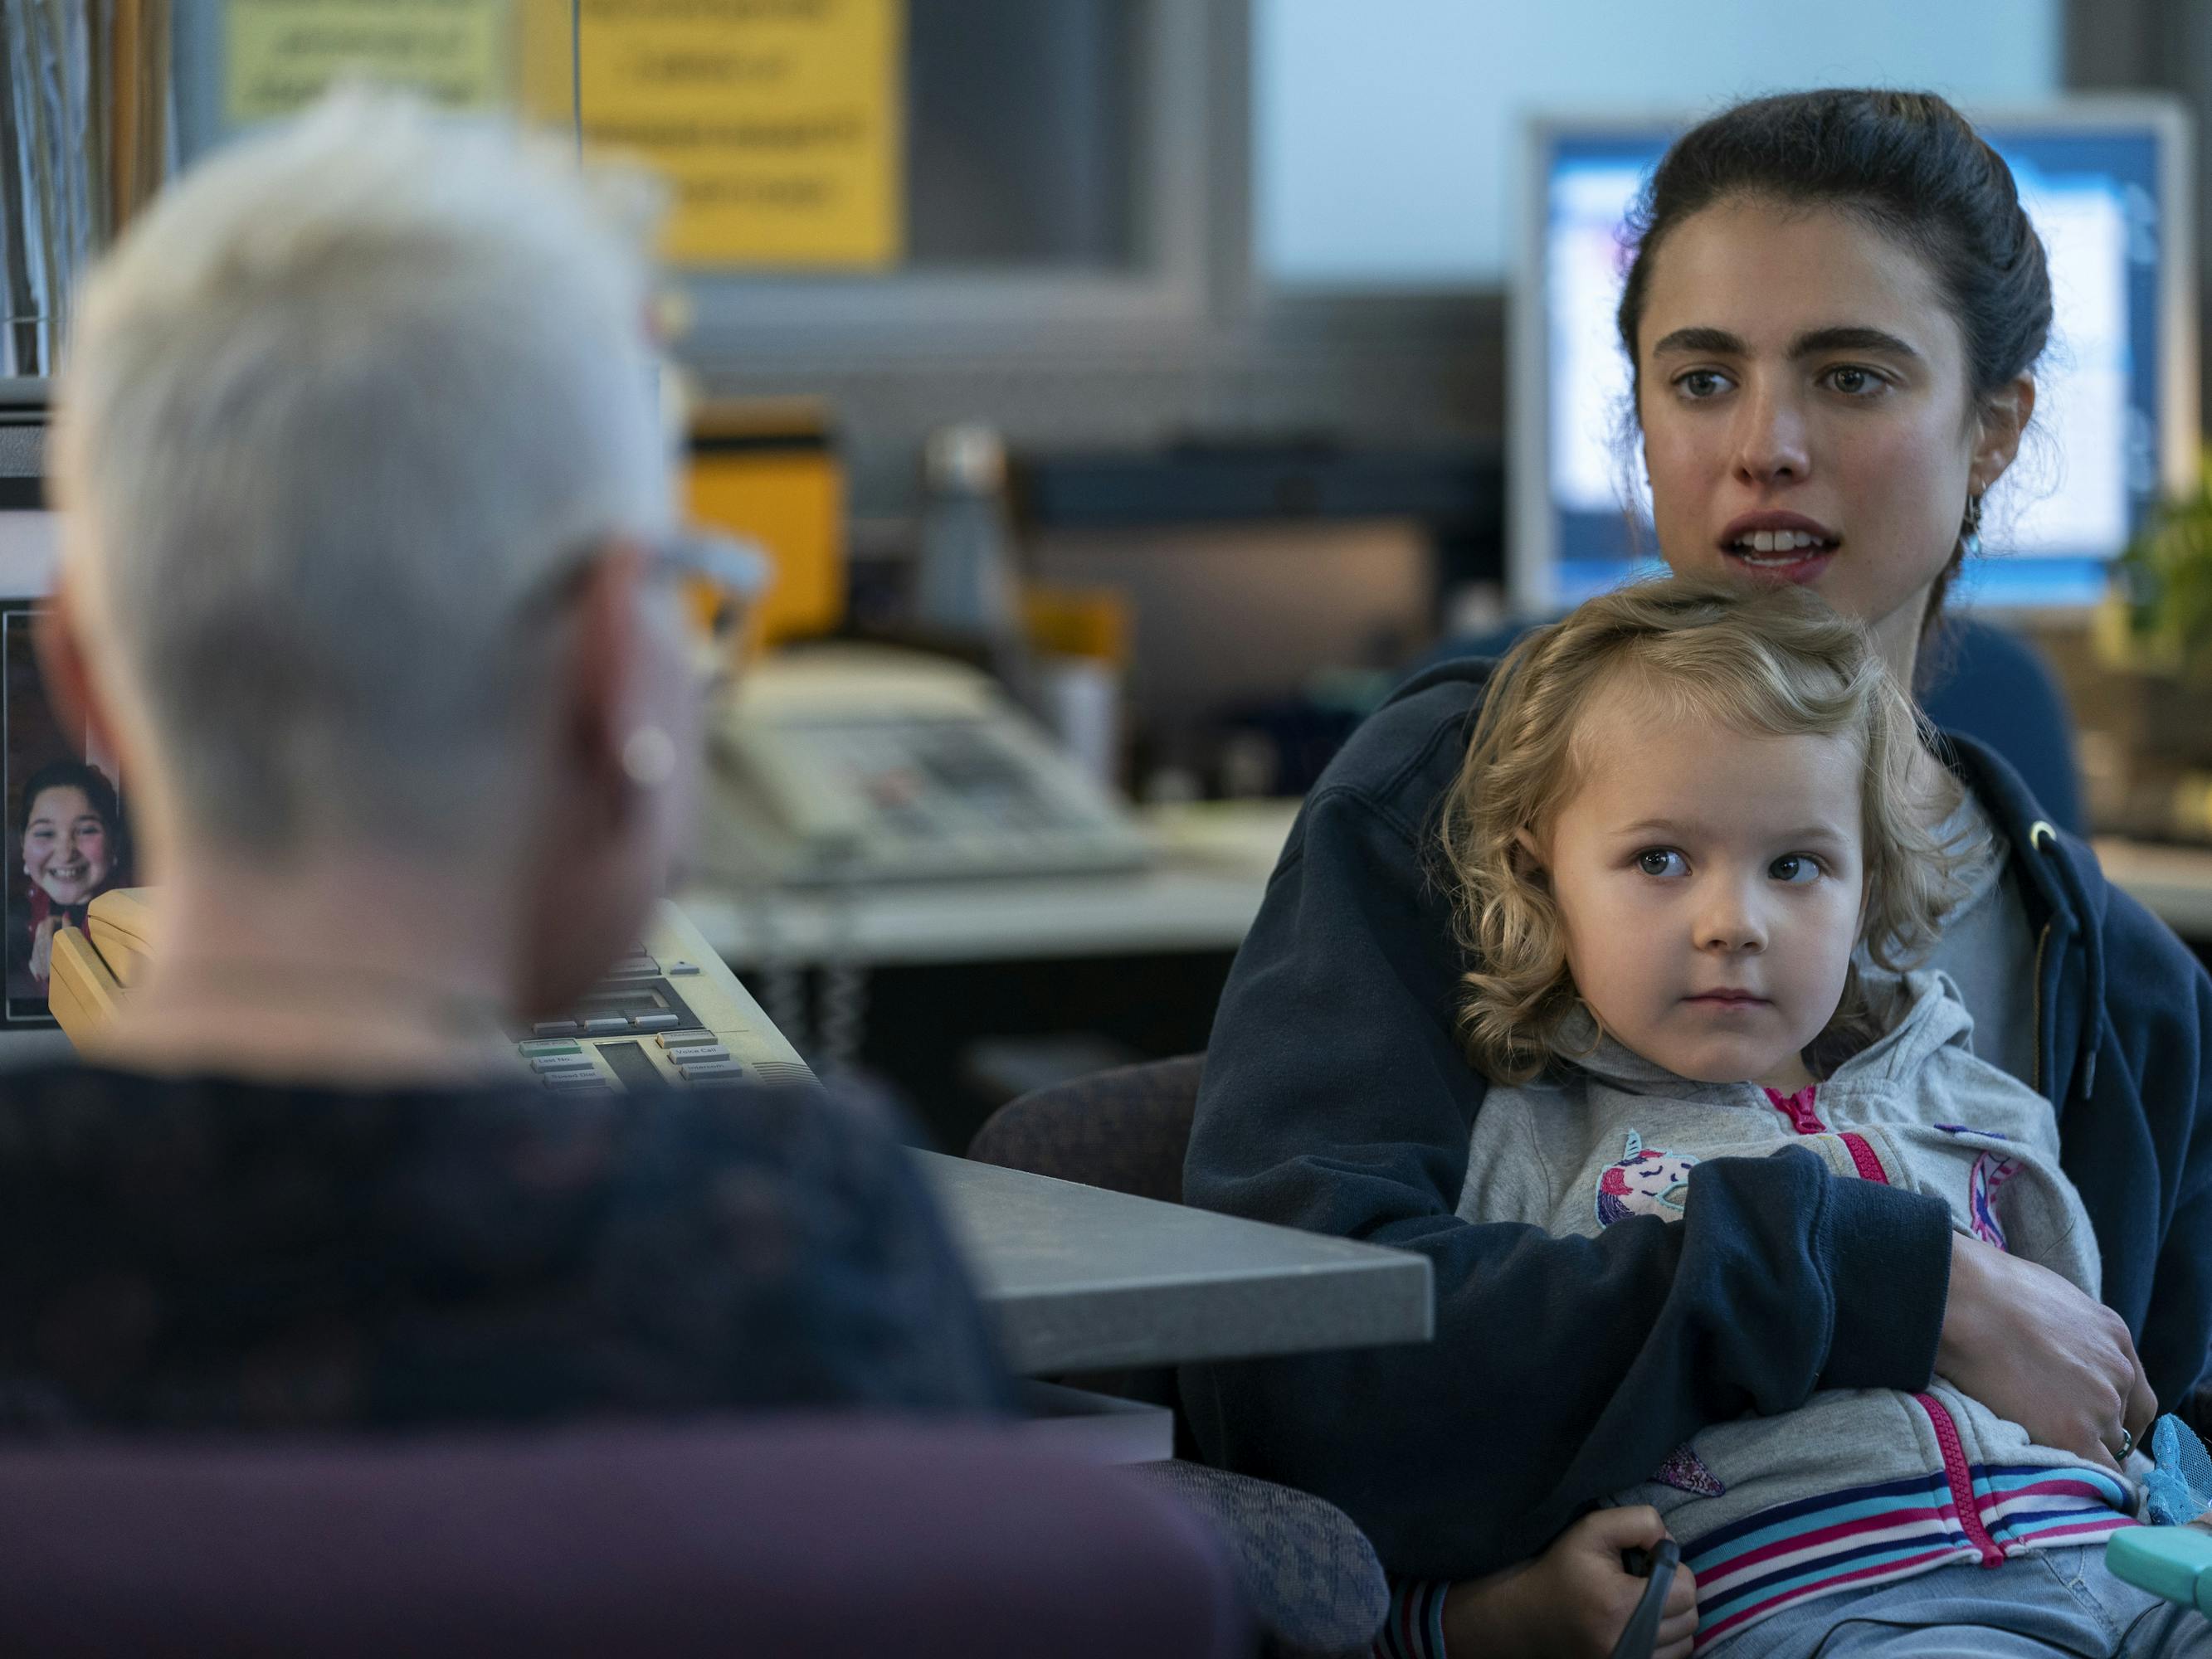 Alex Russell (Margaret Qualley) and Maddy Boyd (Rylea Nevaeh Whittet) sit in a government office and talk to a woman with short white hair. 